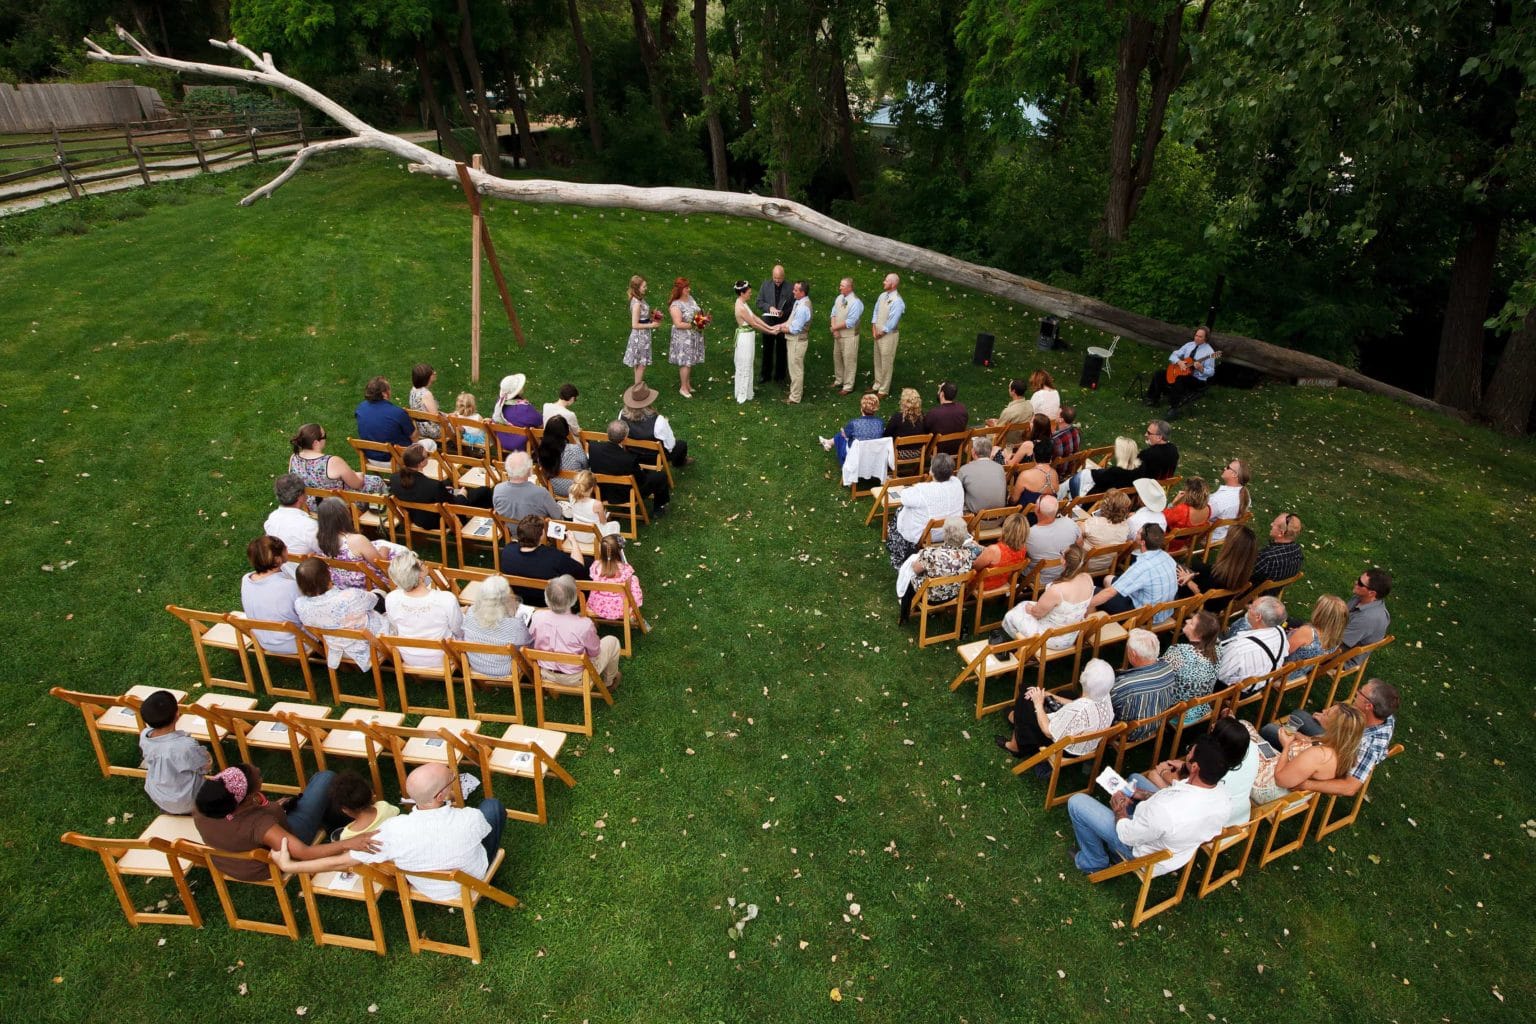 Outdoor Lyons Farmette wedding ceremony on the grass